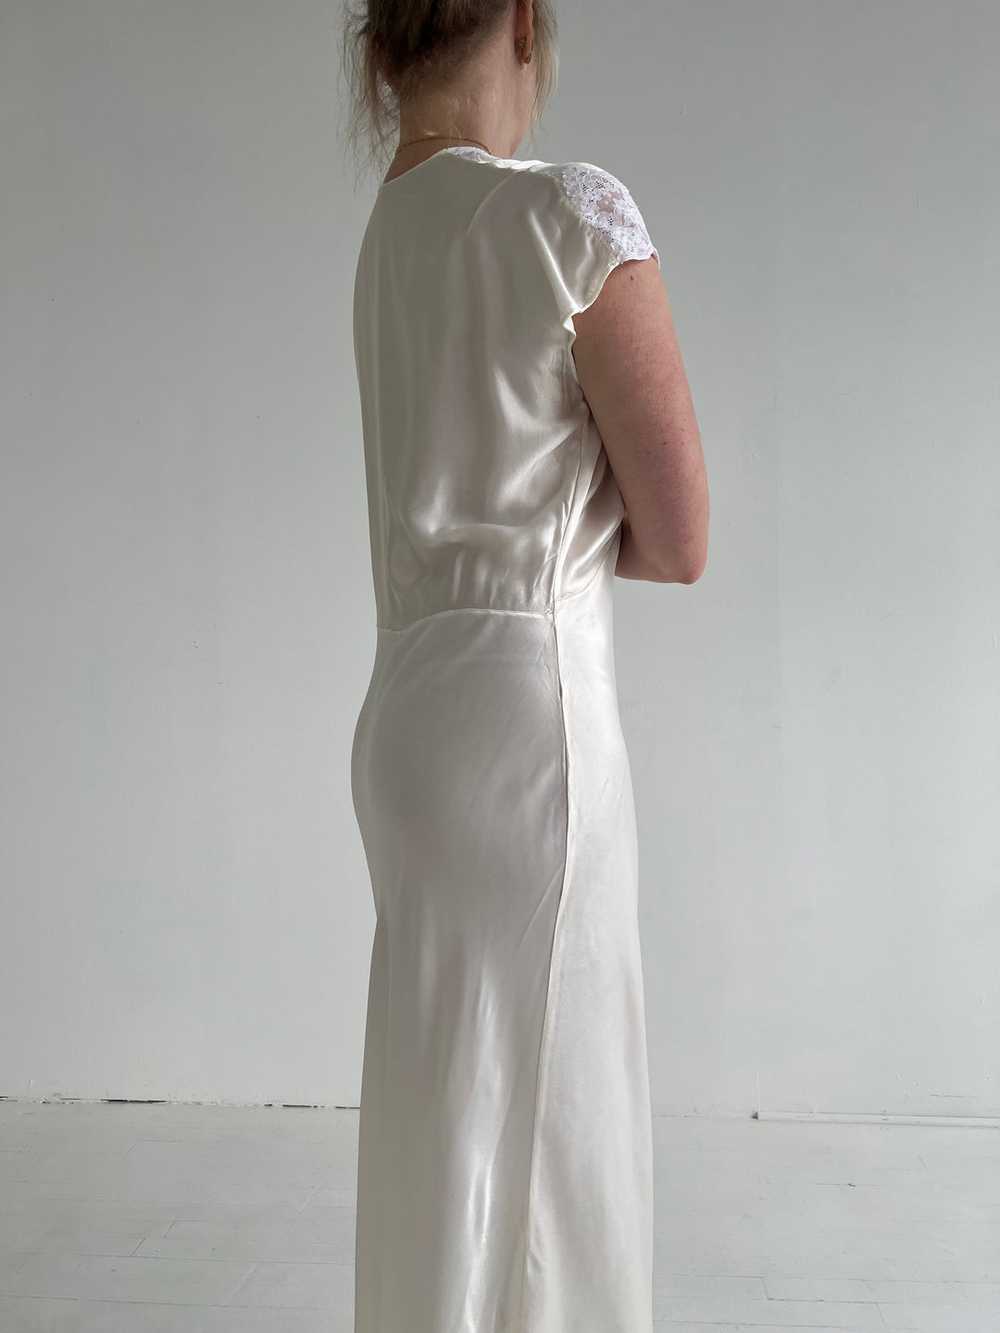 1930's Cream Satin Dress with White Lace - image 7